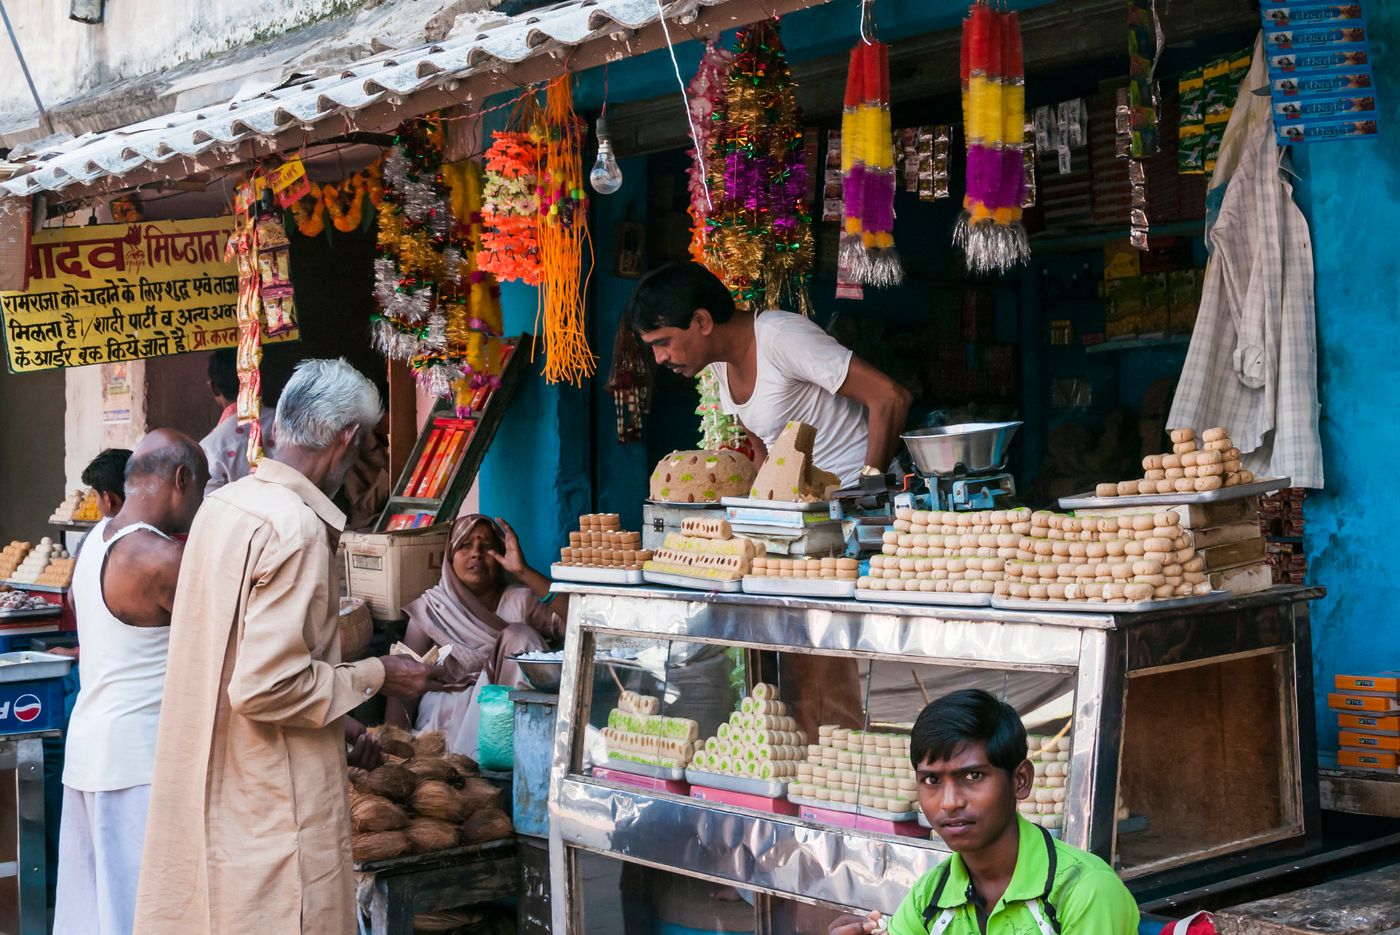 Wide variety of sweets for sale at this street stall. A woman sits in a chair observing the sale, Ram Raja Temple, Orchha 